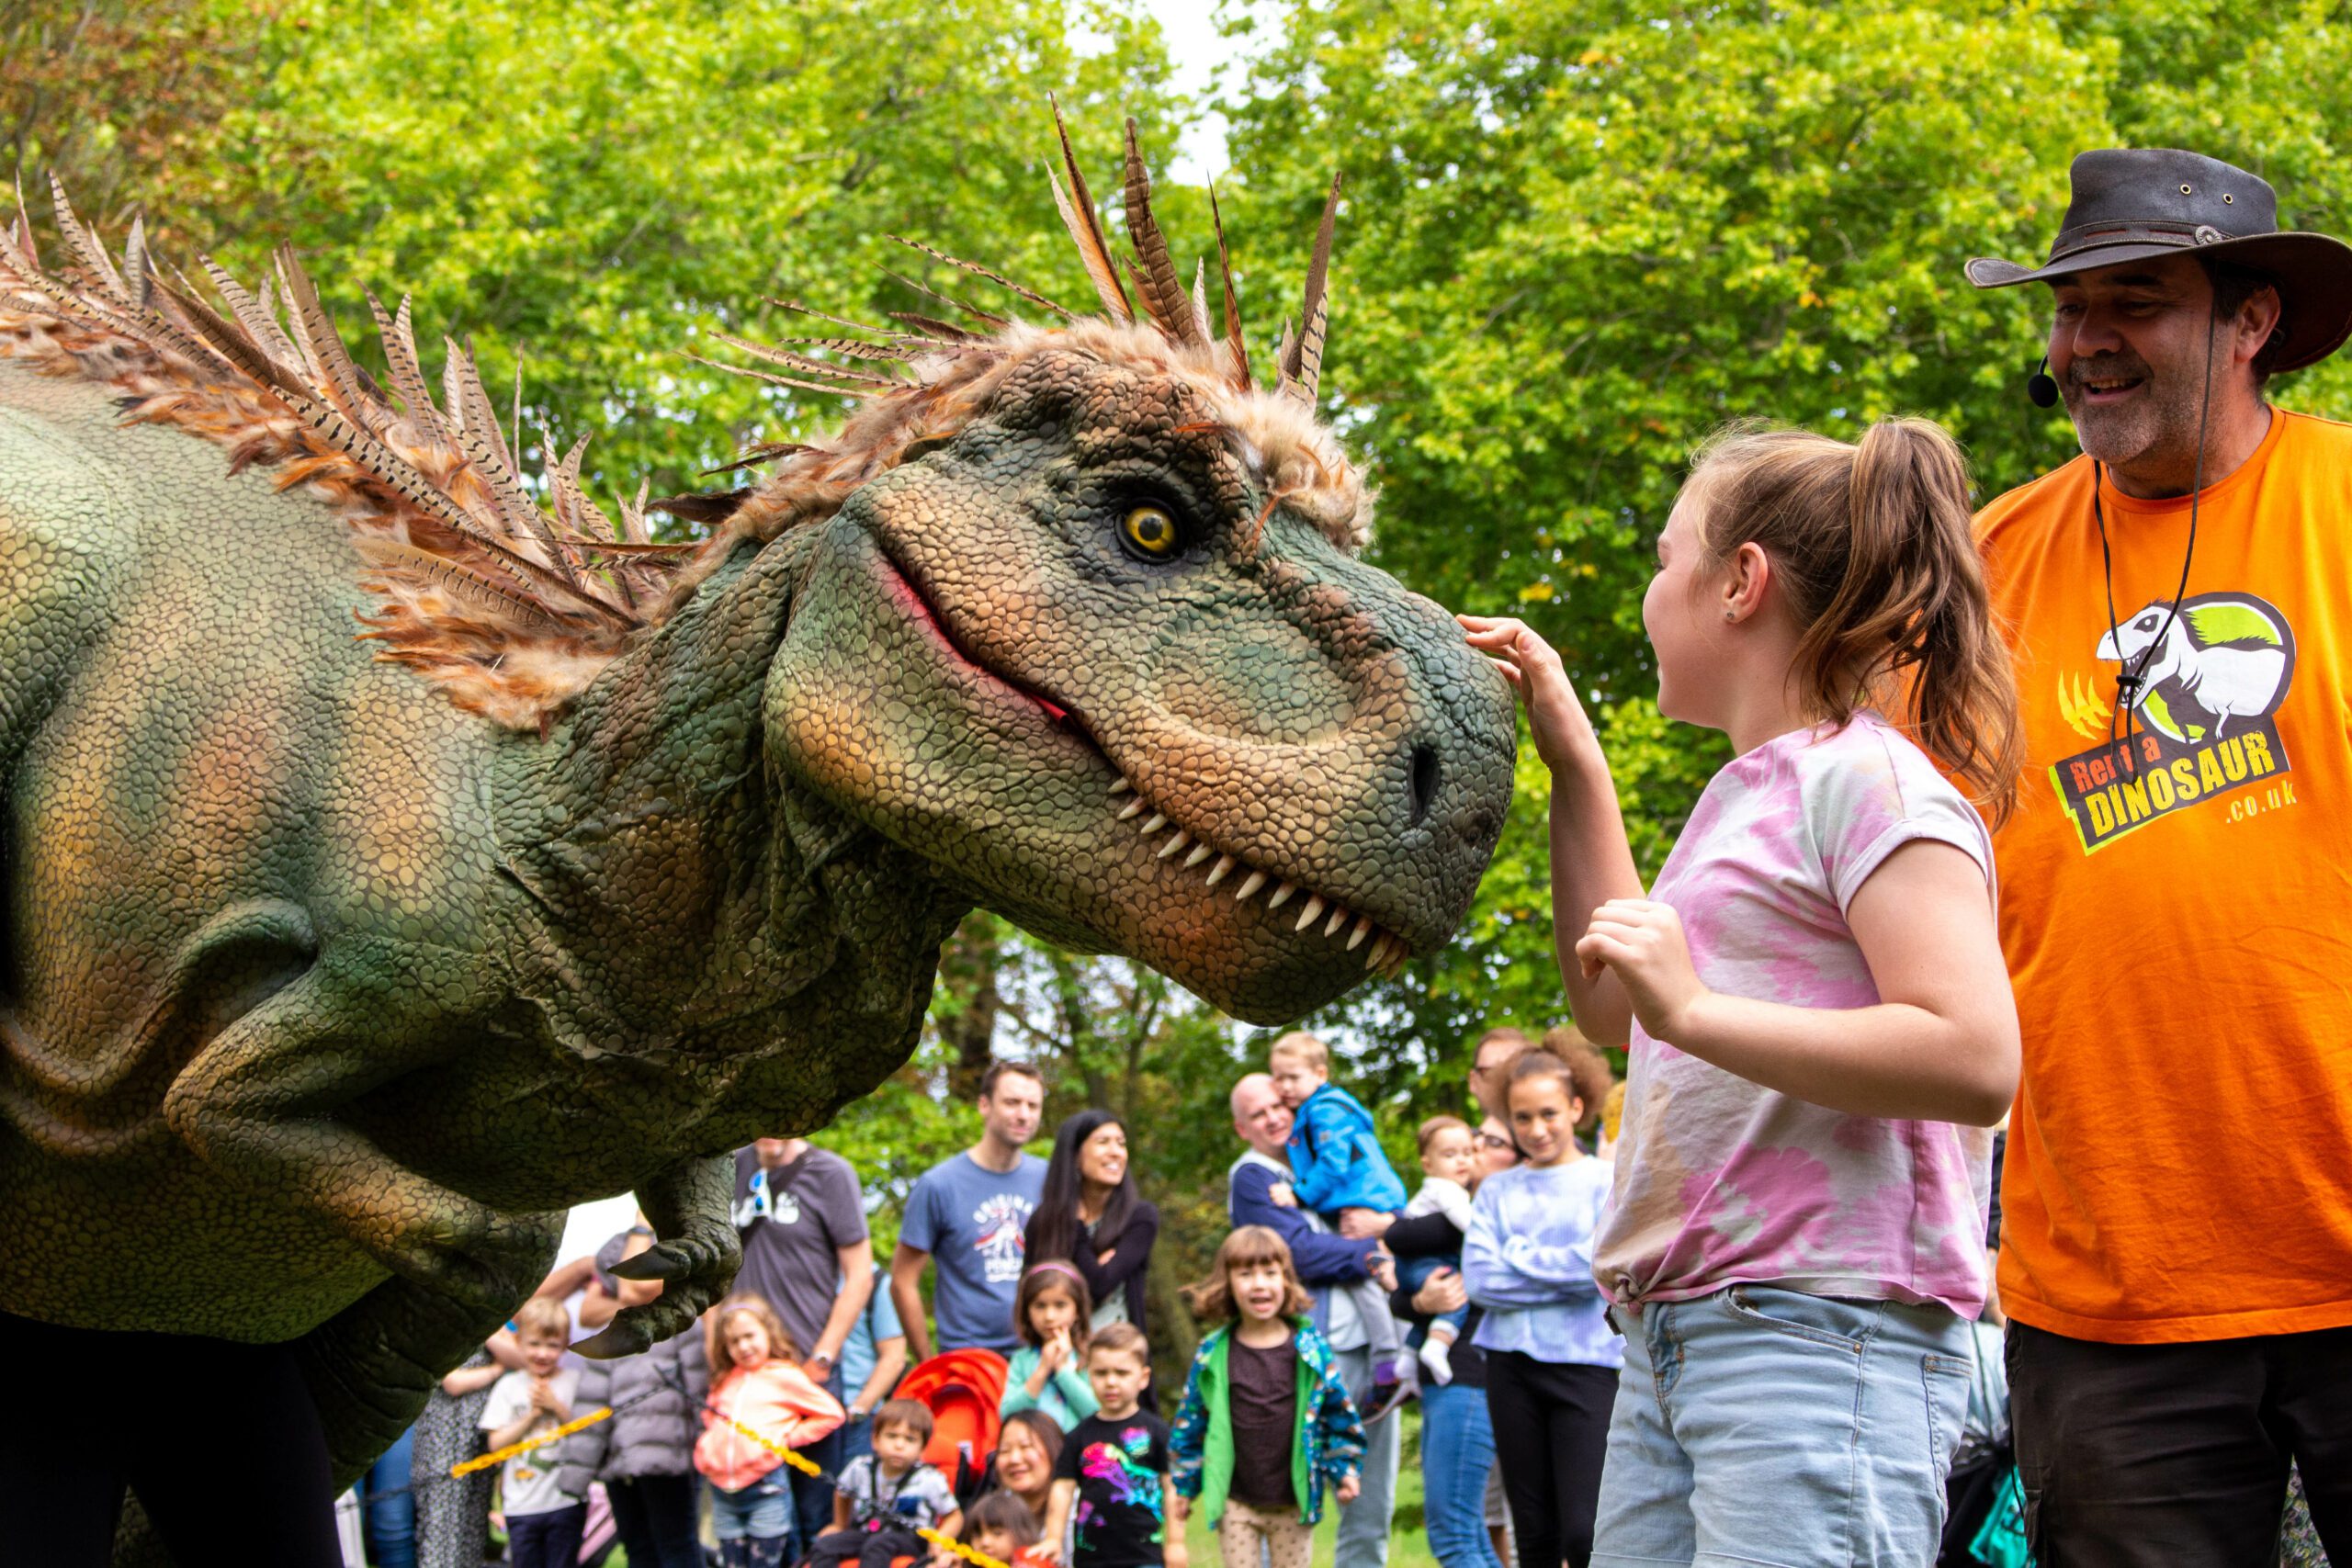 Dinosaurs to roar into Bury St Edmunds for Spring Fayre